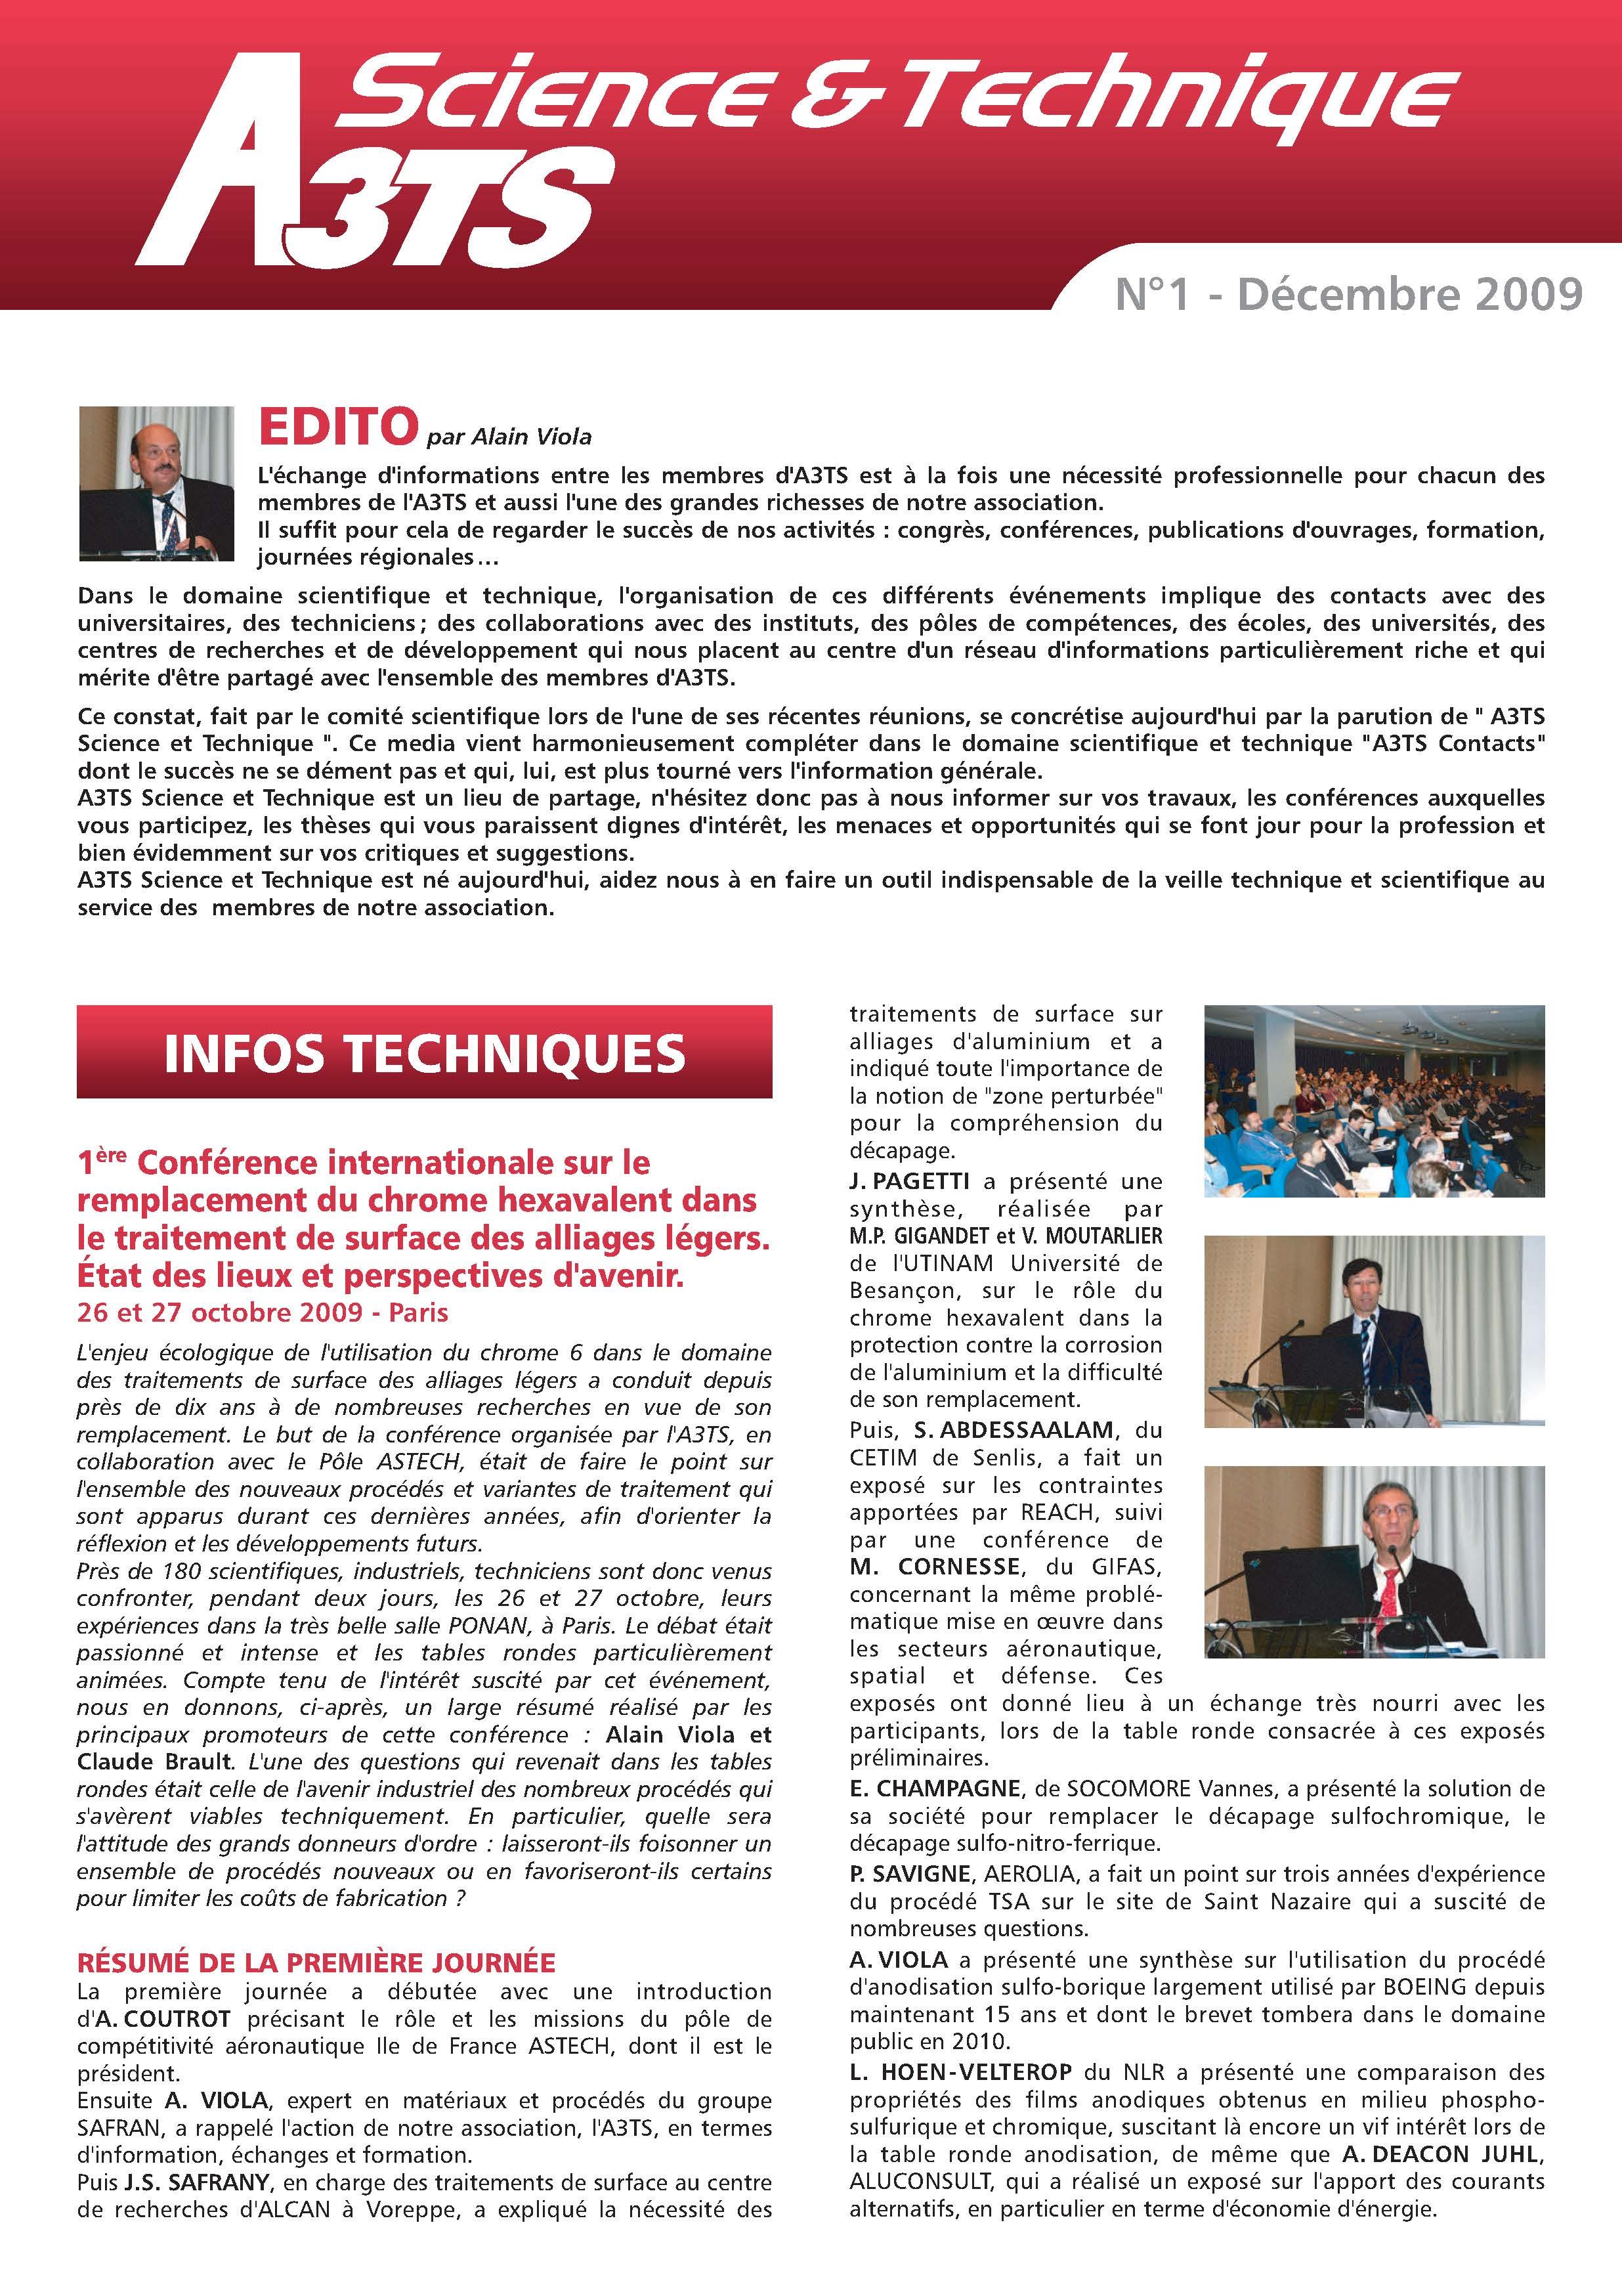 A3TS Science and Technique N°1 - December 2009